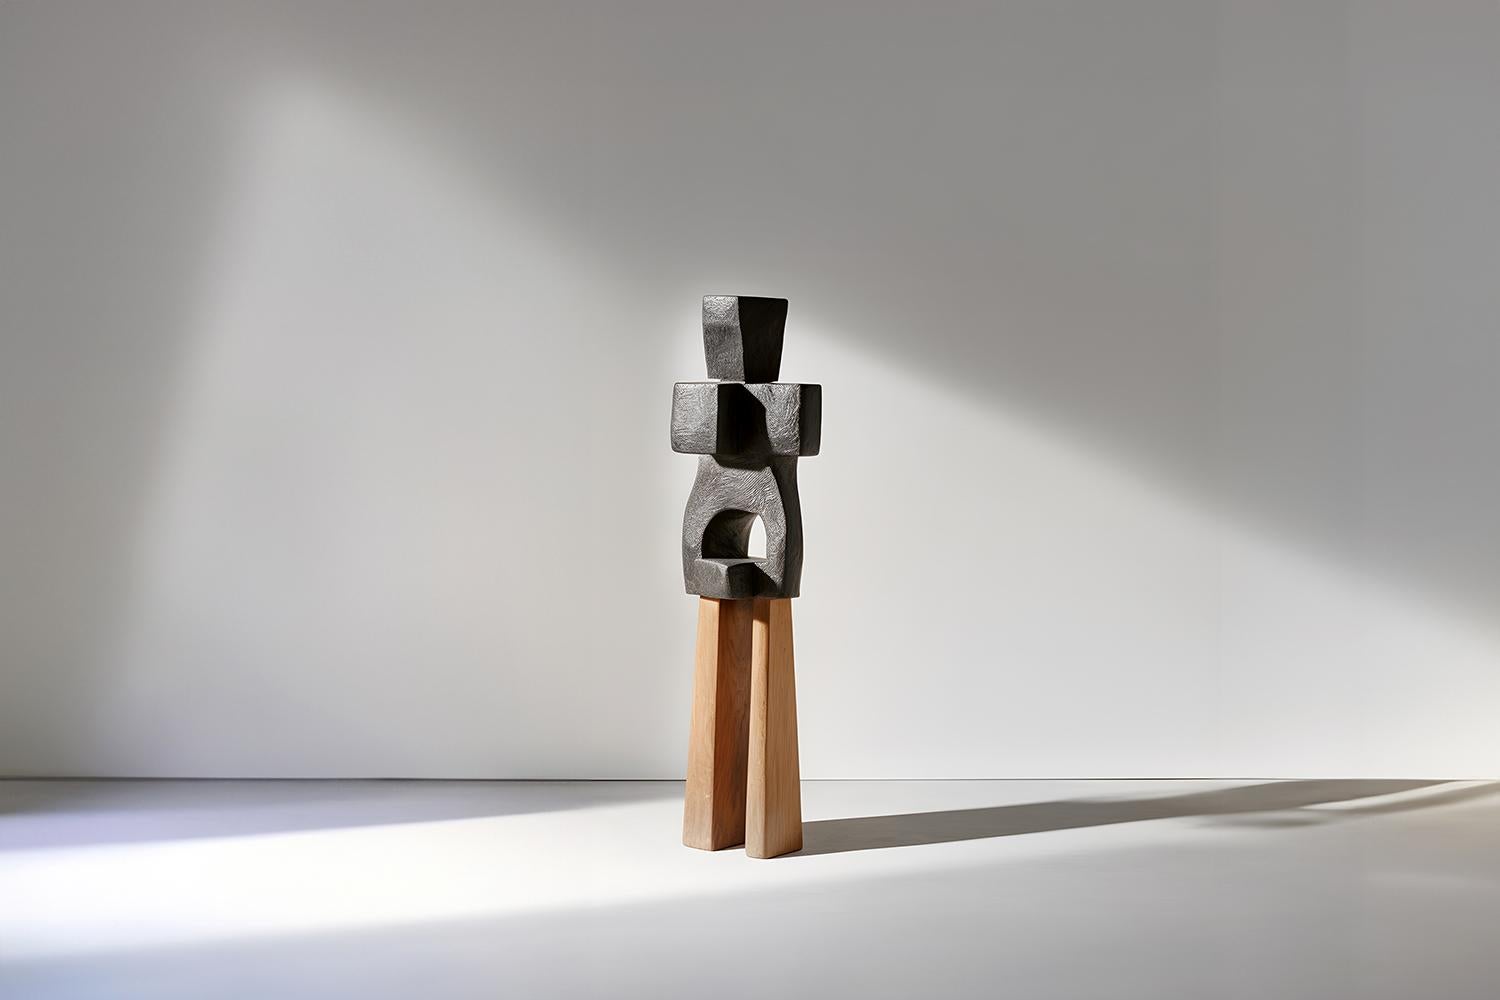 Monumental Wooden Sculpture Inspired in Constantin Brancusi Style, Unseen Force 30 by Joel Escalona

This monolithic sculpture, designed by the talented Artist Joel Escalona, is a towering example of beauty in craftsmanship. Hand and digital machine